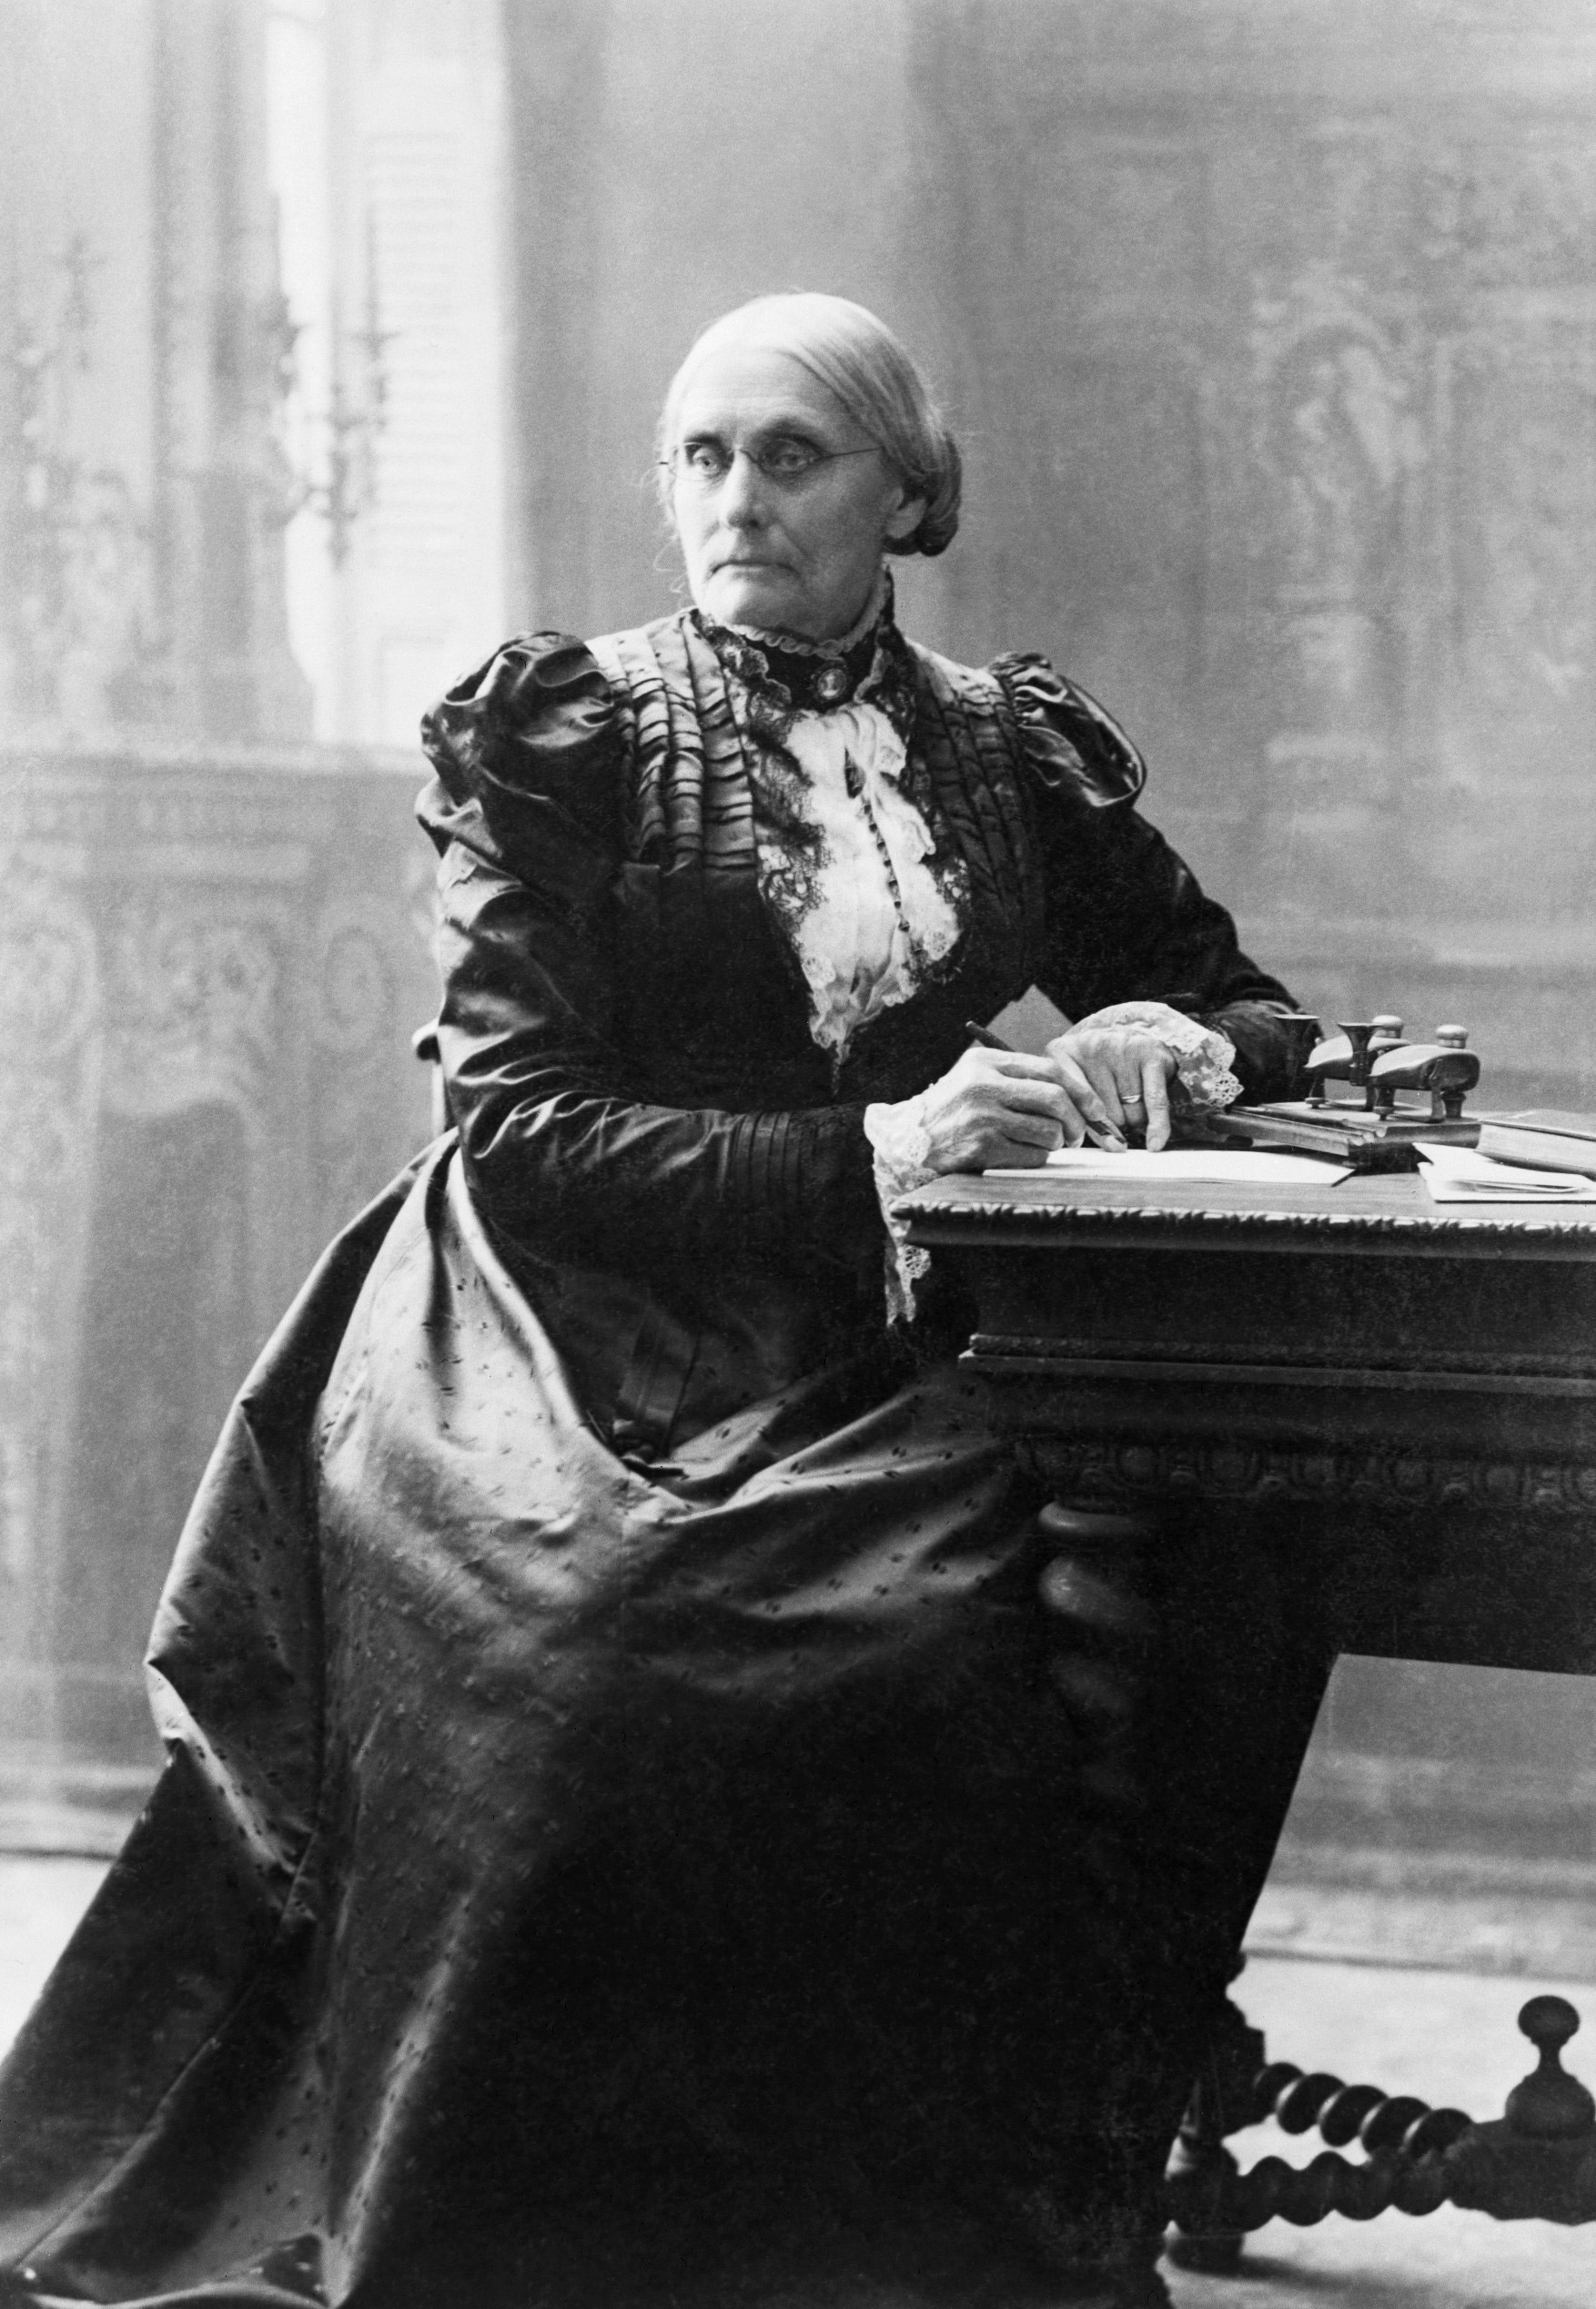 Suffragist Susan B. Anthony (1820-1906), seated at her desk, December 1898.